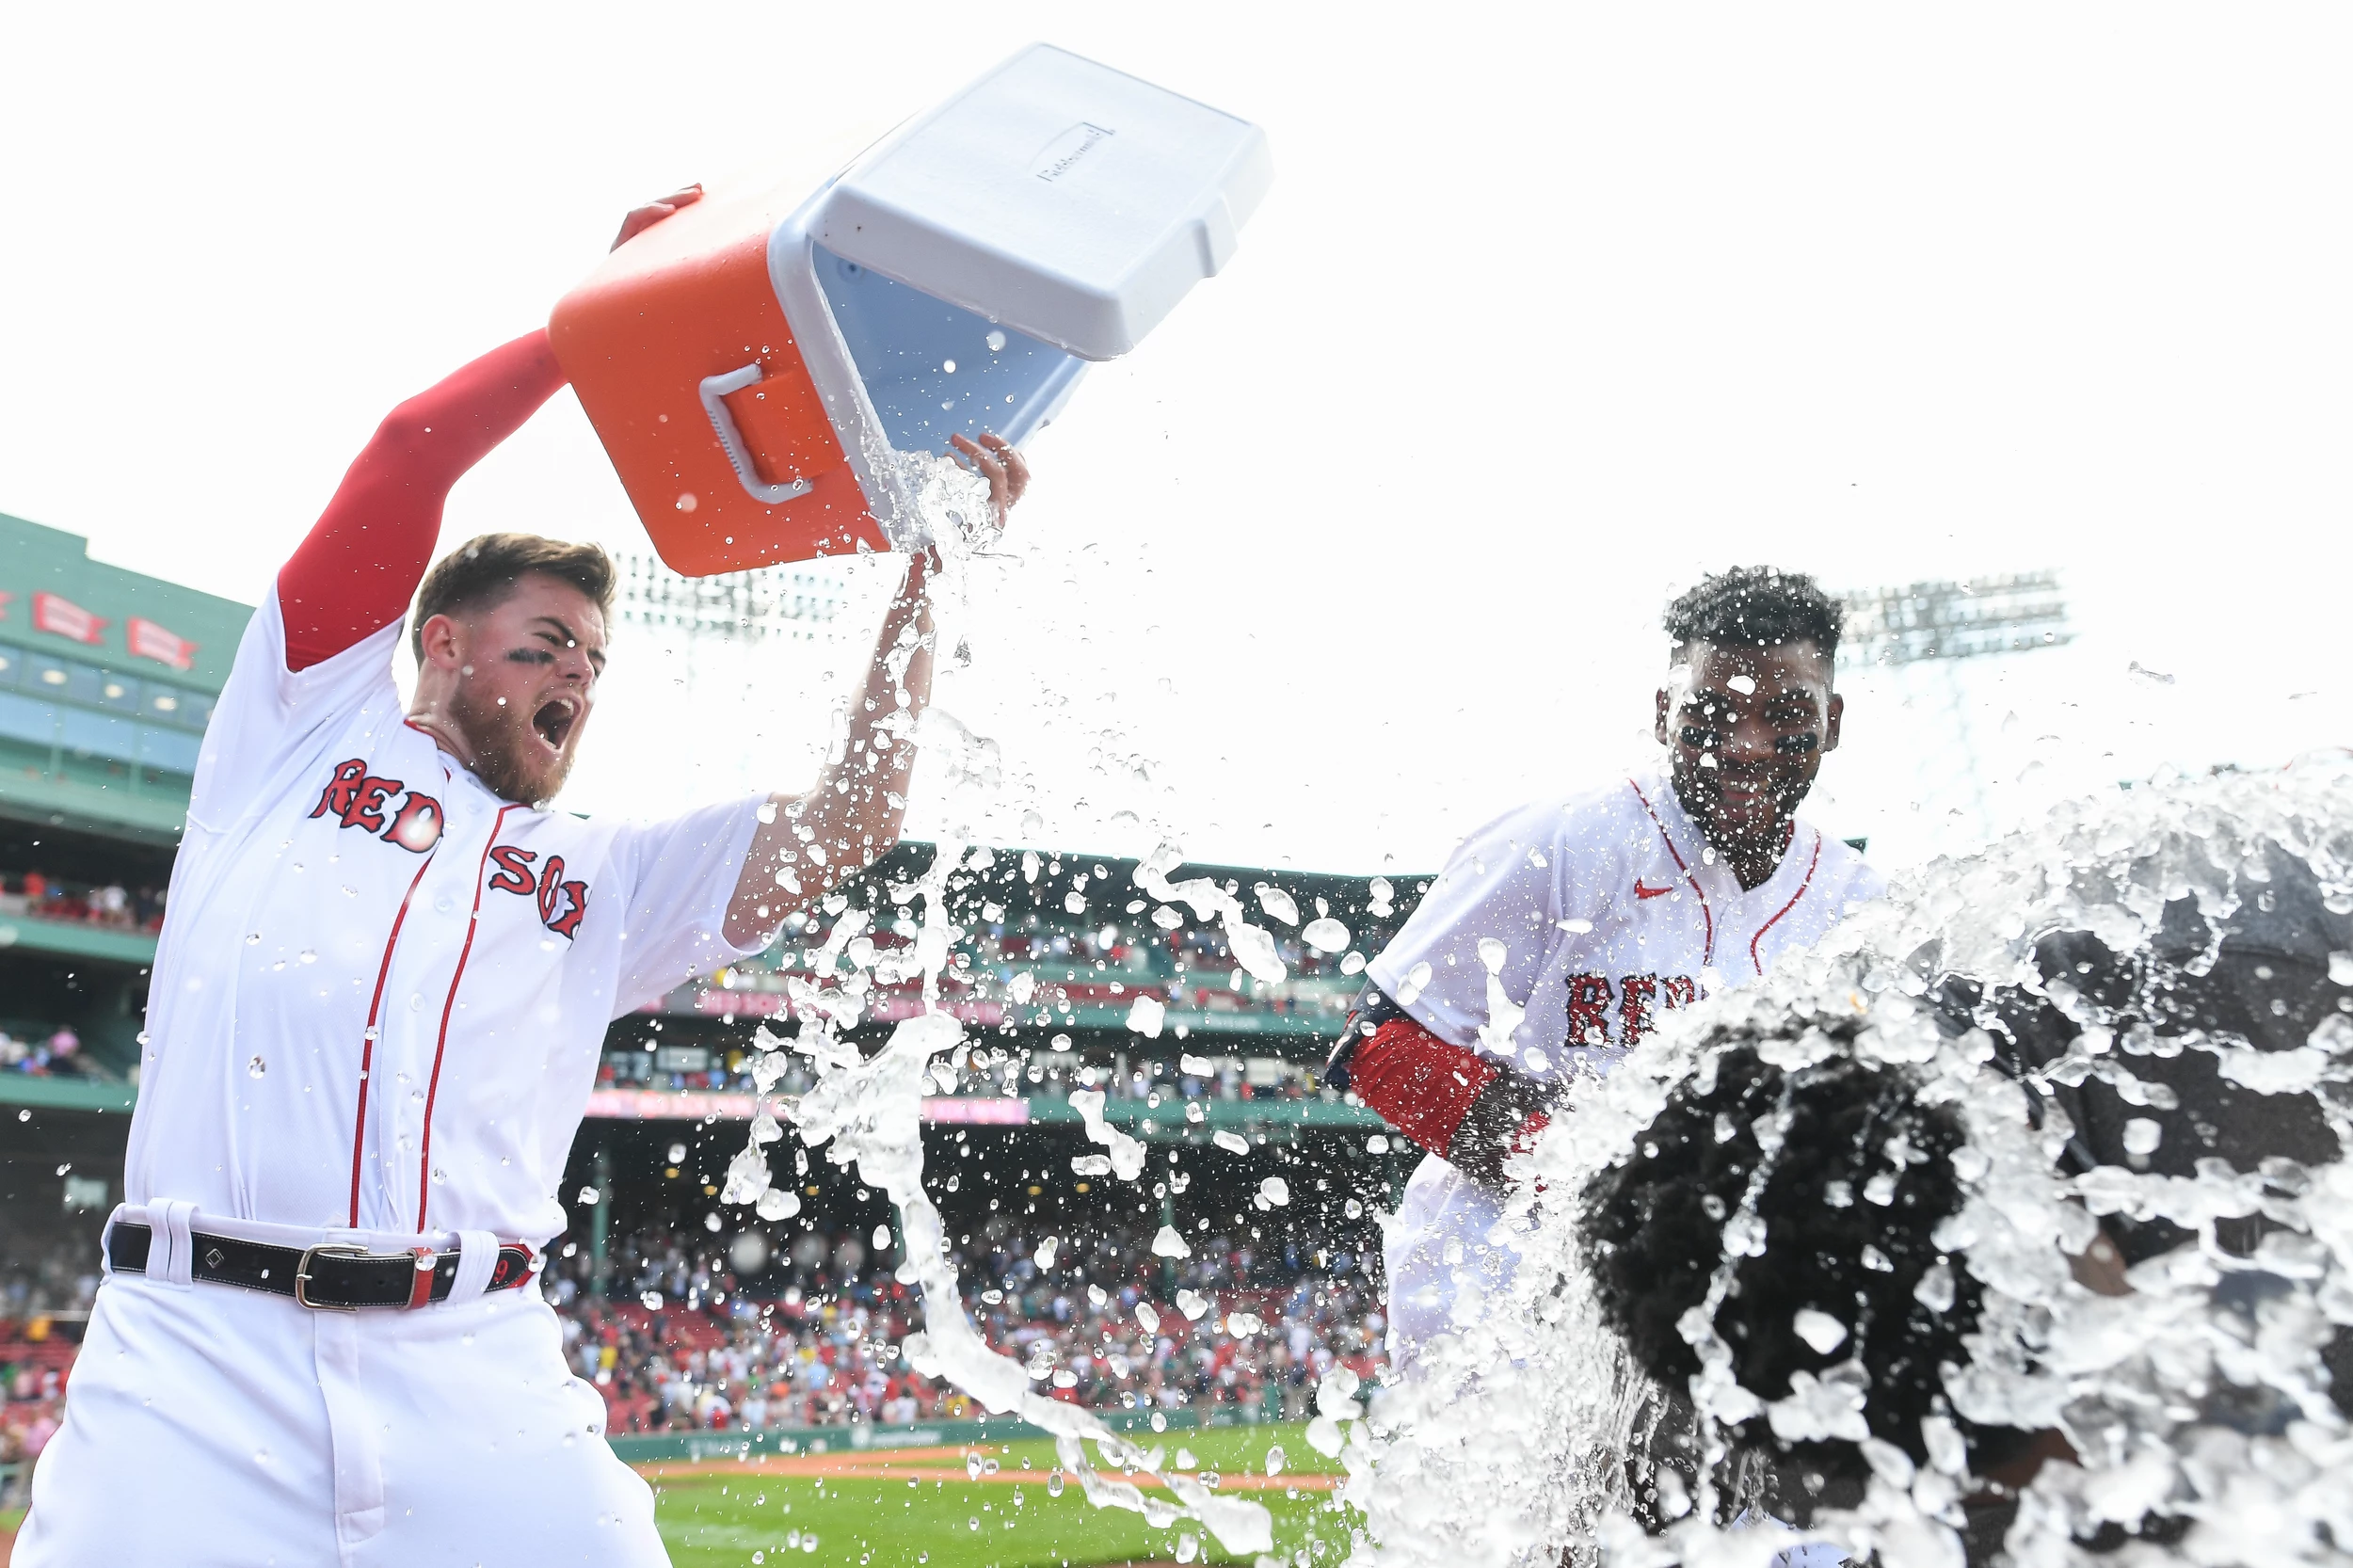 Cordero hits slam in 10th, surging Red Sox sweep Mariners - The